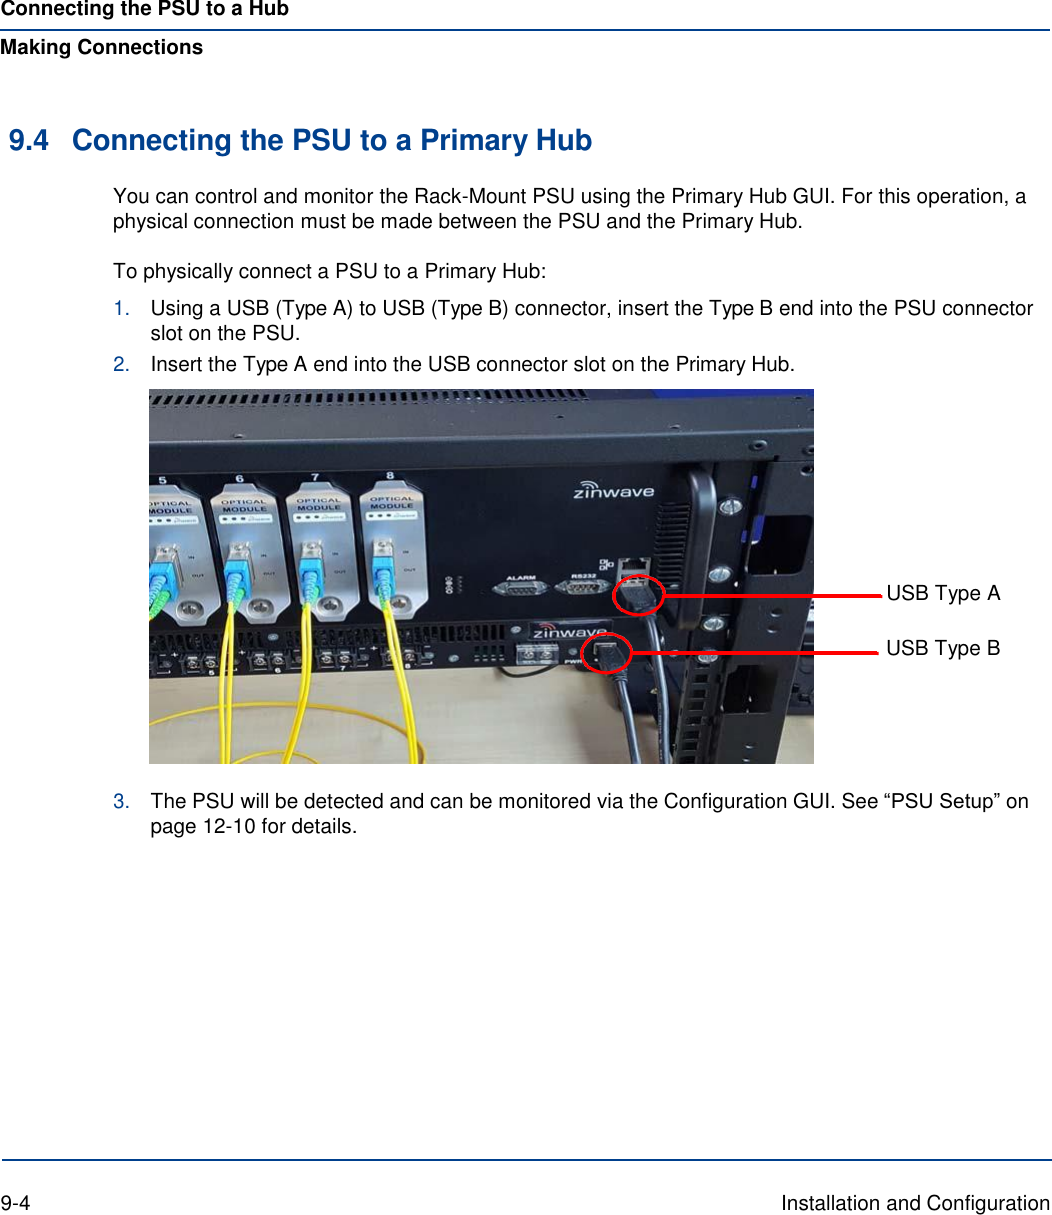 Connecting the PSU to a Hub Making Connections   9.4  Connecting the PSU to a Primary Hub You can control and monitor the Rack-Mount PSU using the Primary Hub GUI. For this operation, a physical connection must be made between the PSU and the Primary Hub.  To physically connect a PSU to a Primary Hub: 1. Using a USB (Type A) to USB (Type B) connector, insert the Type B end into the PSU connector slot on the PSU. 2. Insert the Type A end into the USB connector slot on the Primary Hub.         USB Type A USB Type B     3. The PSU will be detected and can be monitored via the Configuration GUI. See “PSU Setup” on page 12-10 for details.               9-4  Installation and Configuration 